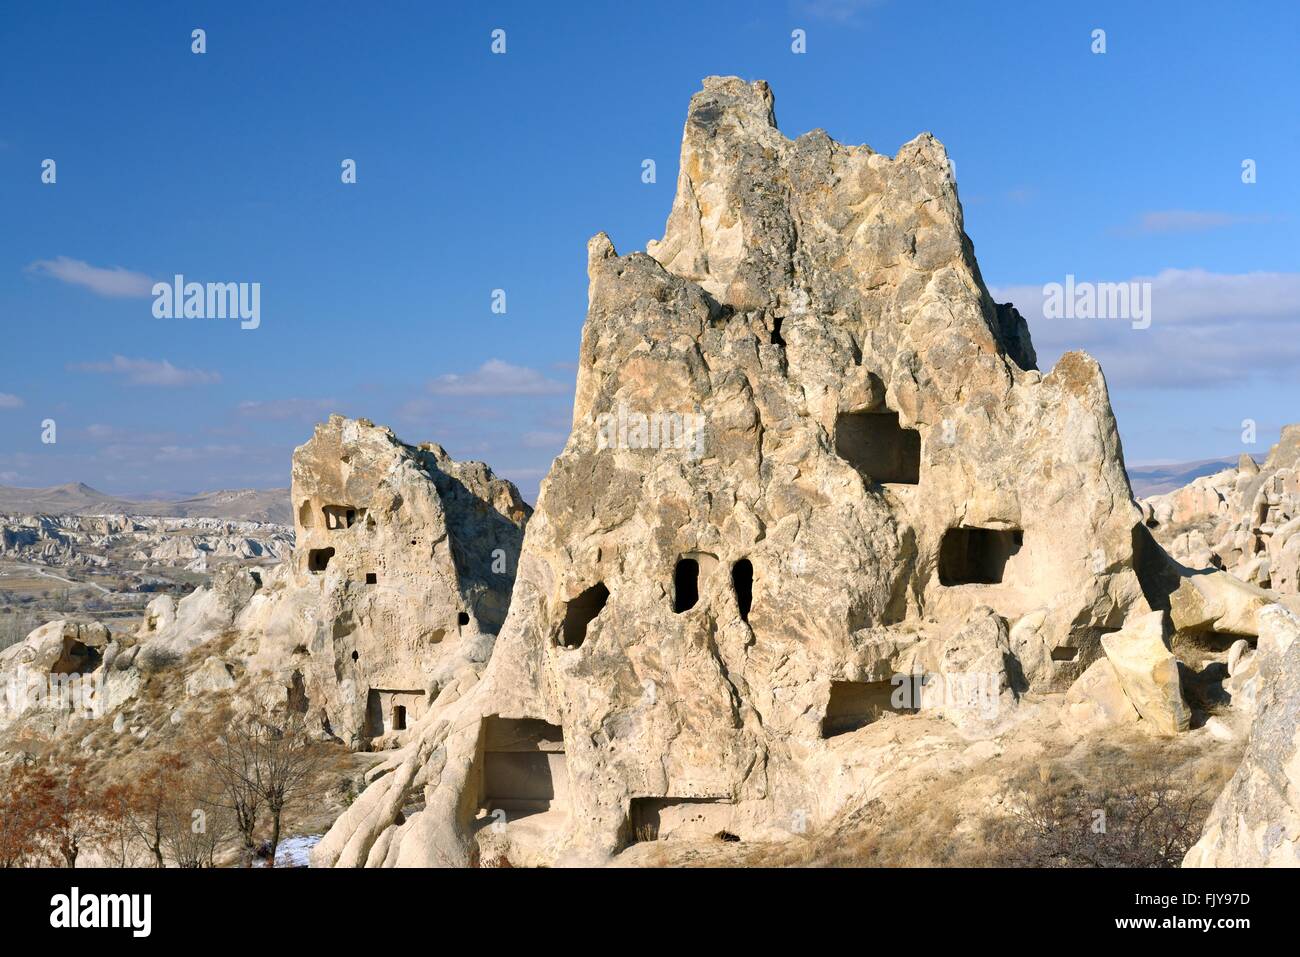 Eroded volcanic tuff early Christian nunnery troglodyte cave dwelling in Goreme Open Air Museum National Park, Cappadocia Turkey Stock Photo